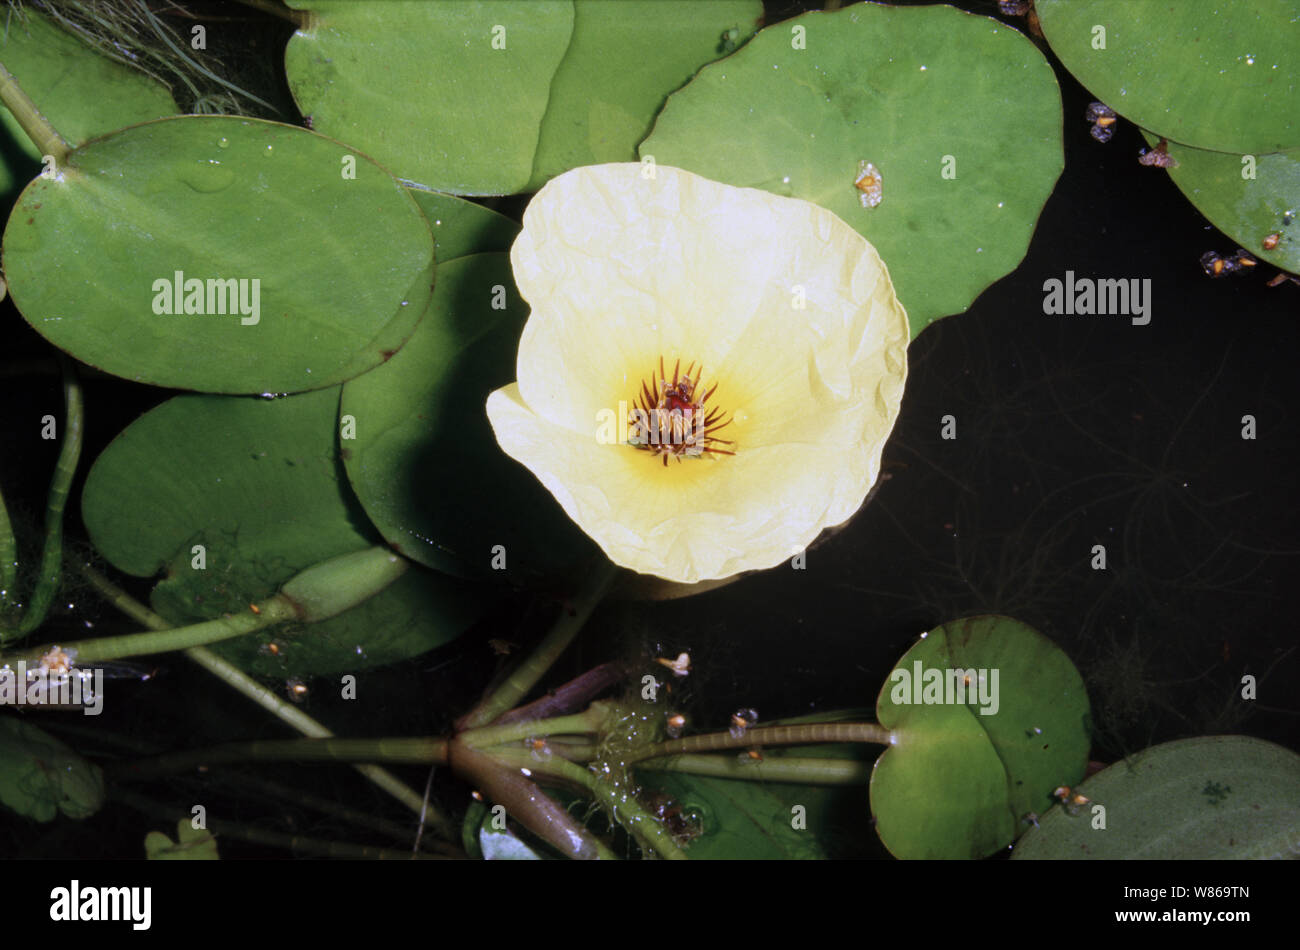 Flowering Water poppy, Hydrocleys nymphoides Stock Photo